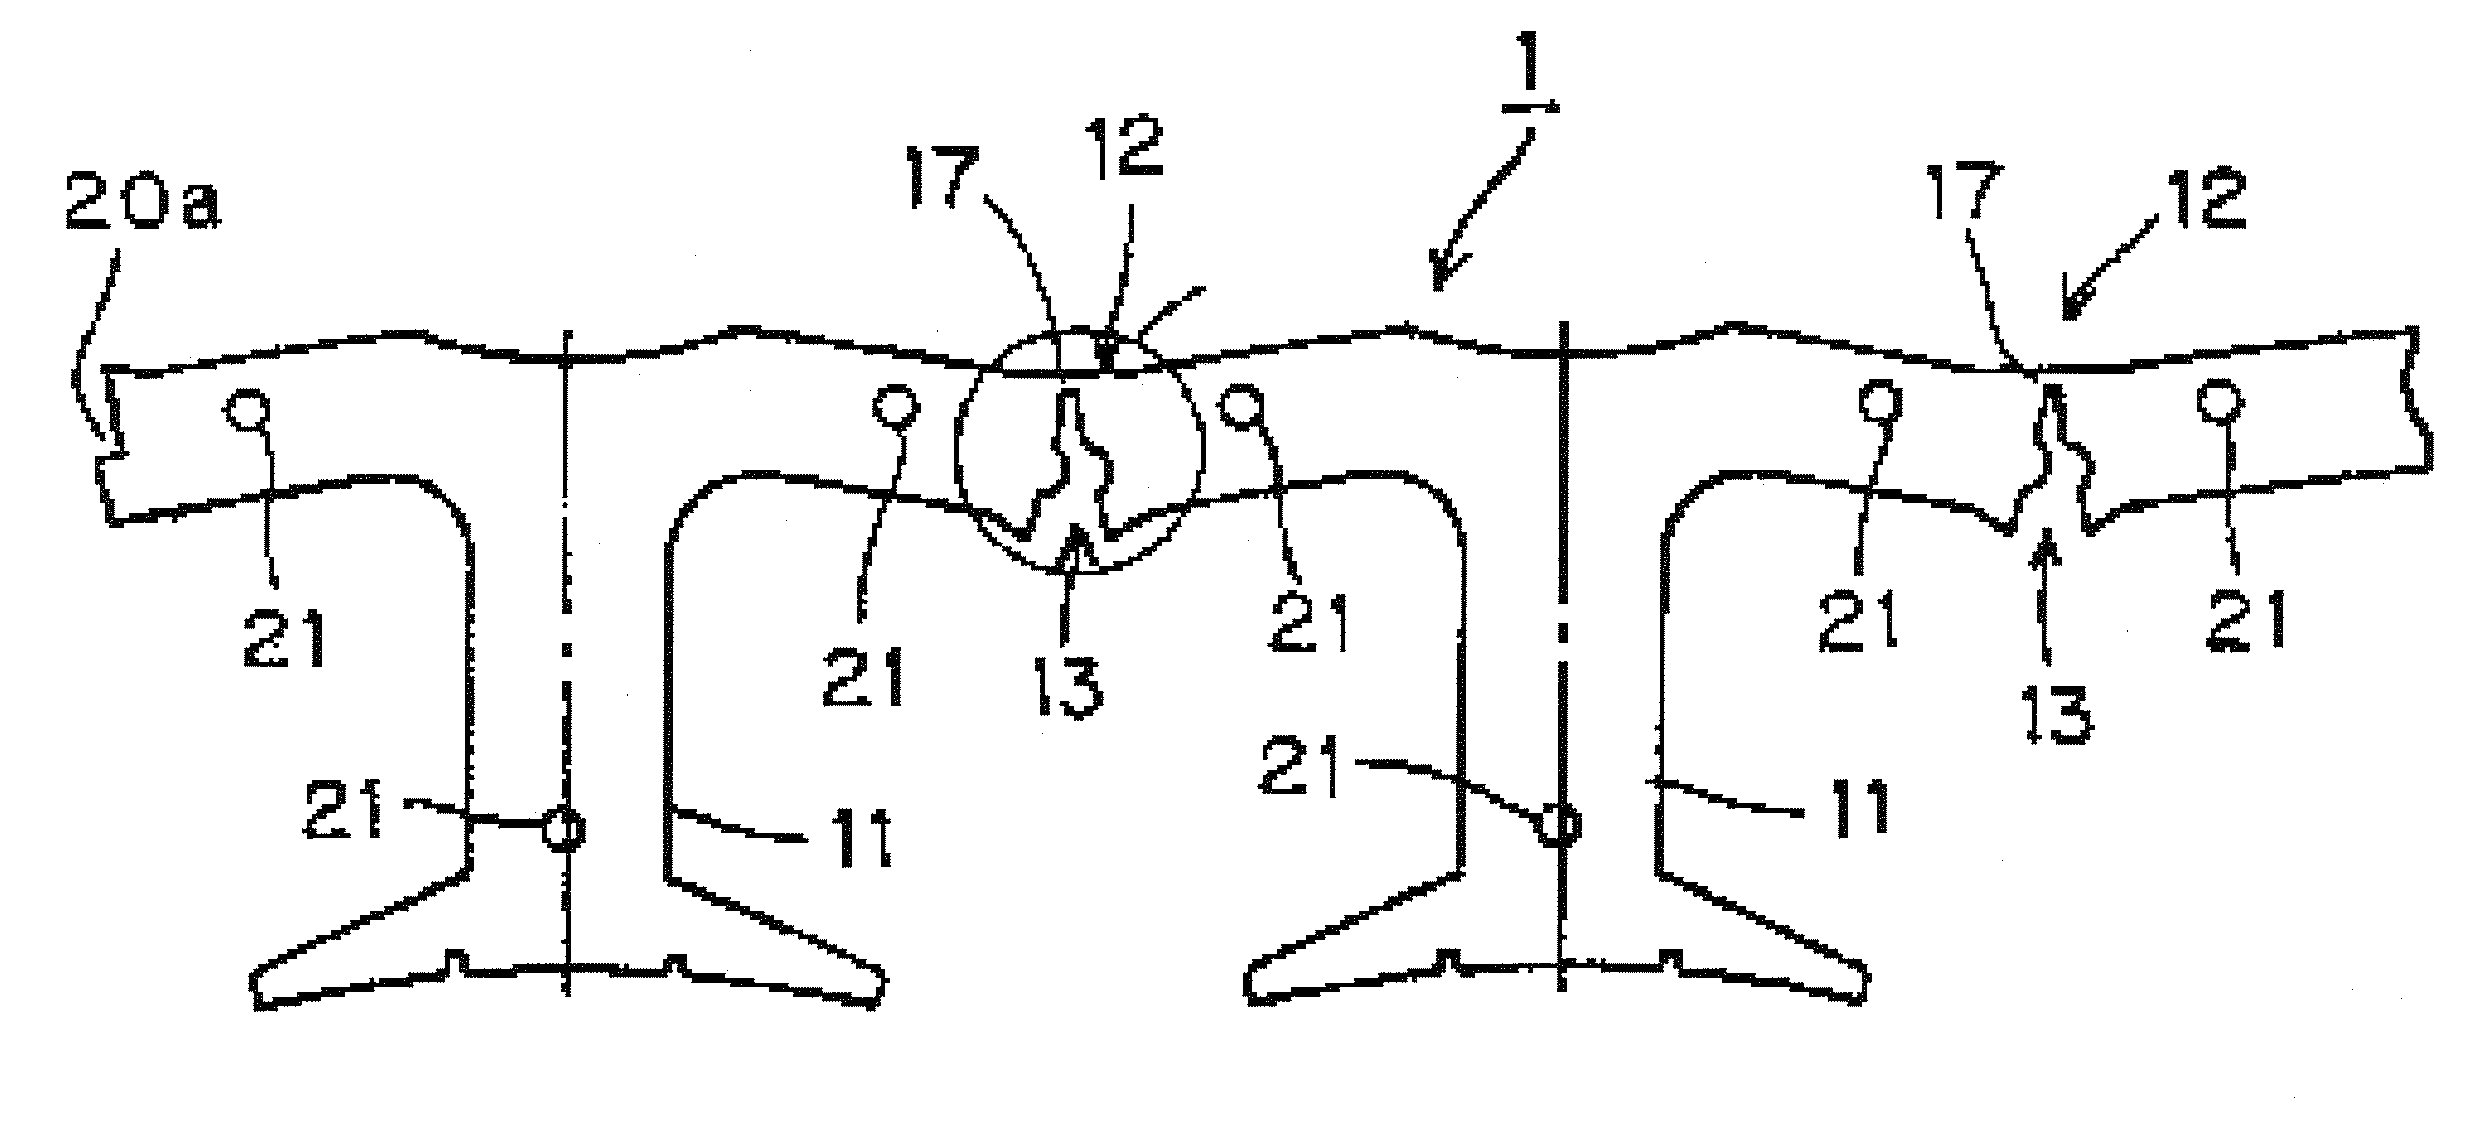 Stator core, an electric motor in which it is utilized, and method of manufacturing a stator core